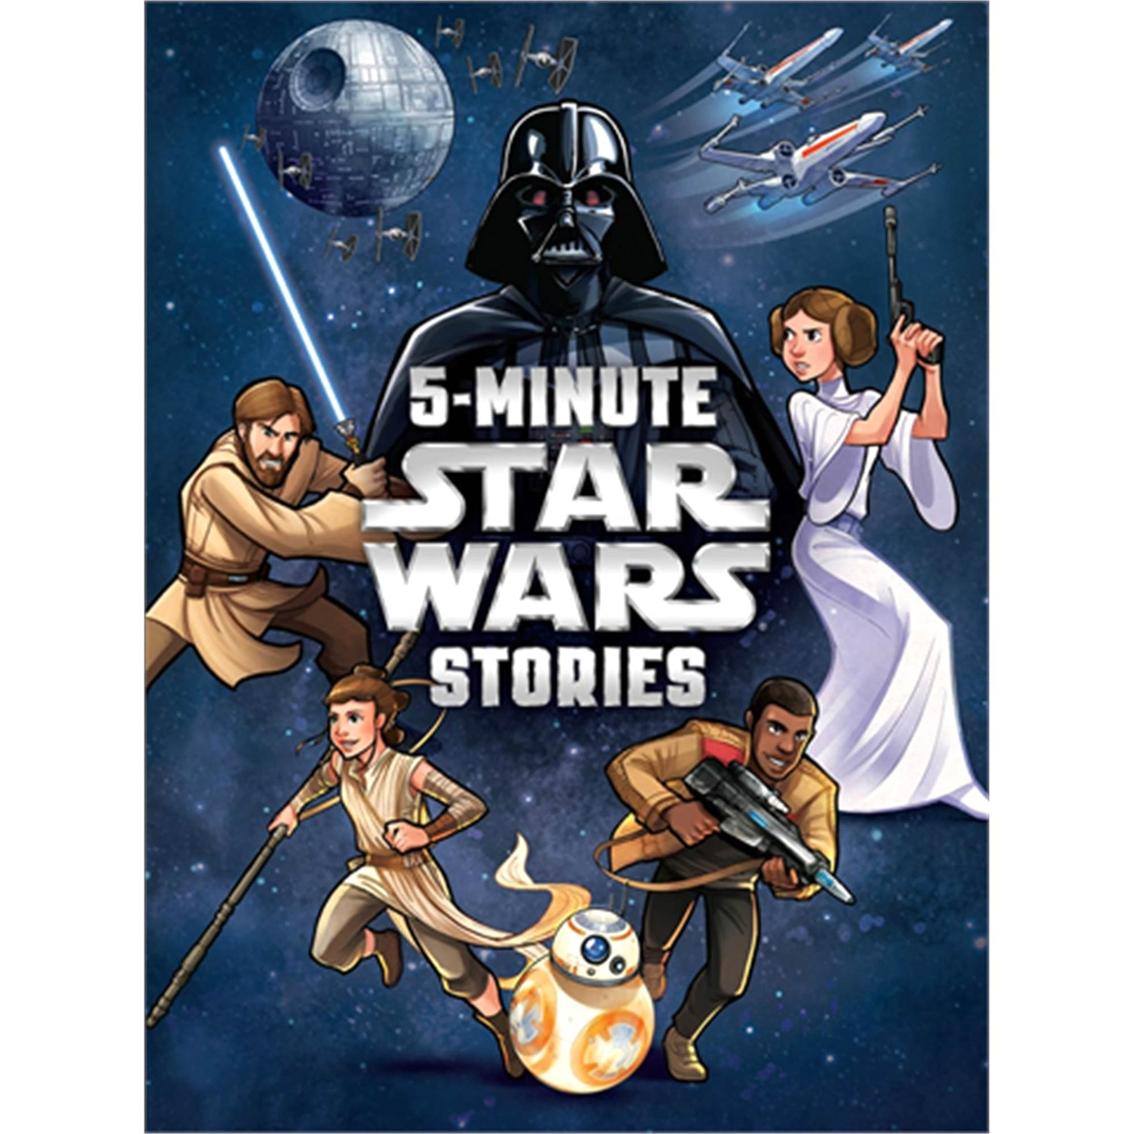 5-Minute Star Wars Stories Hardcover for $5.61